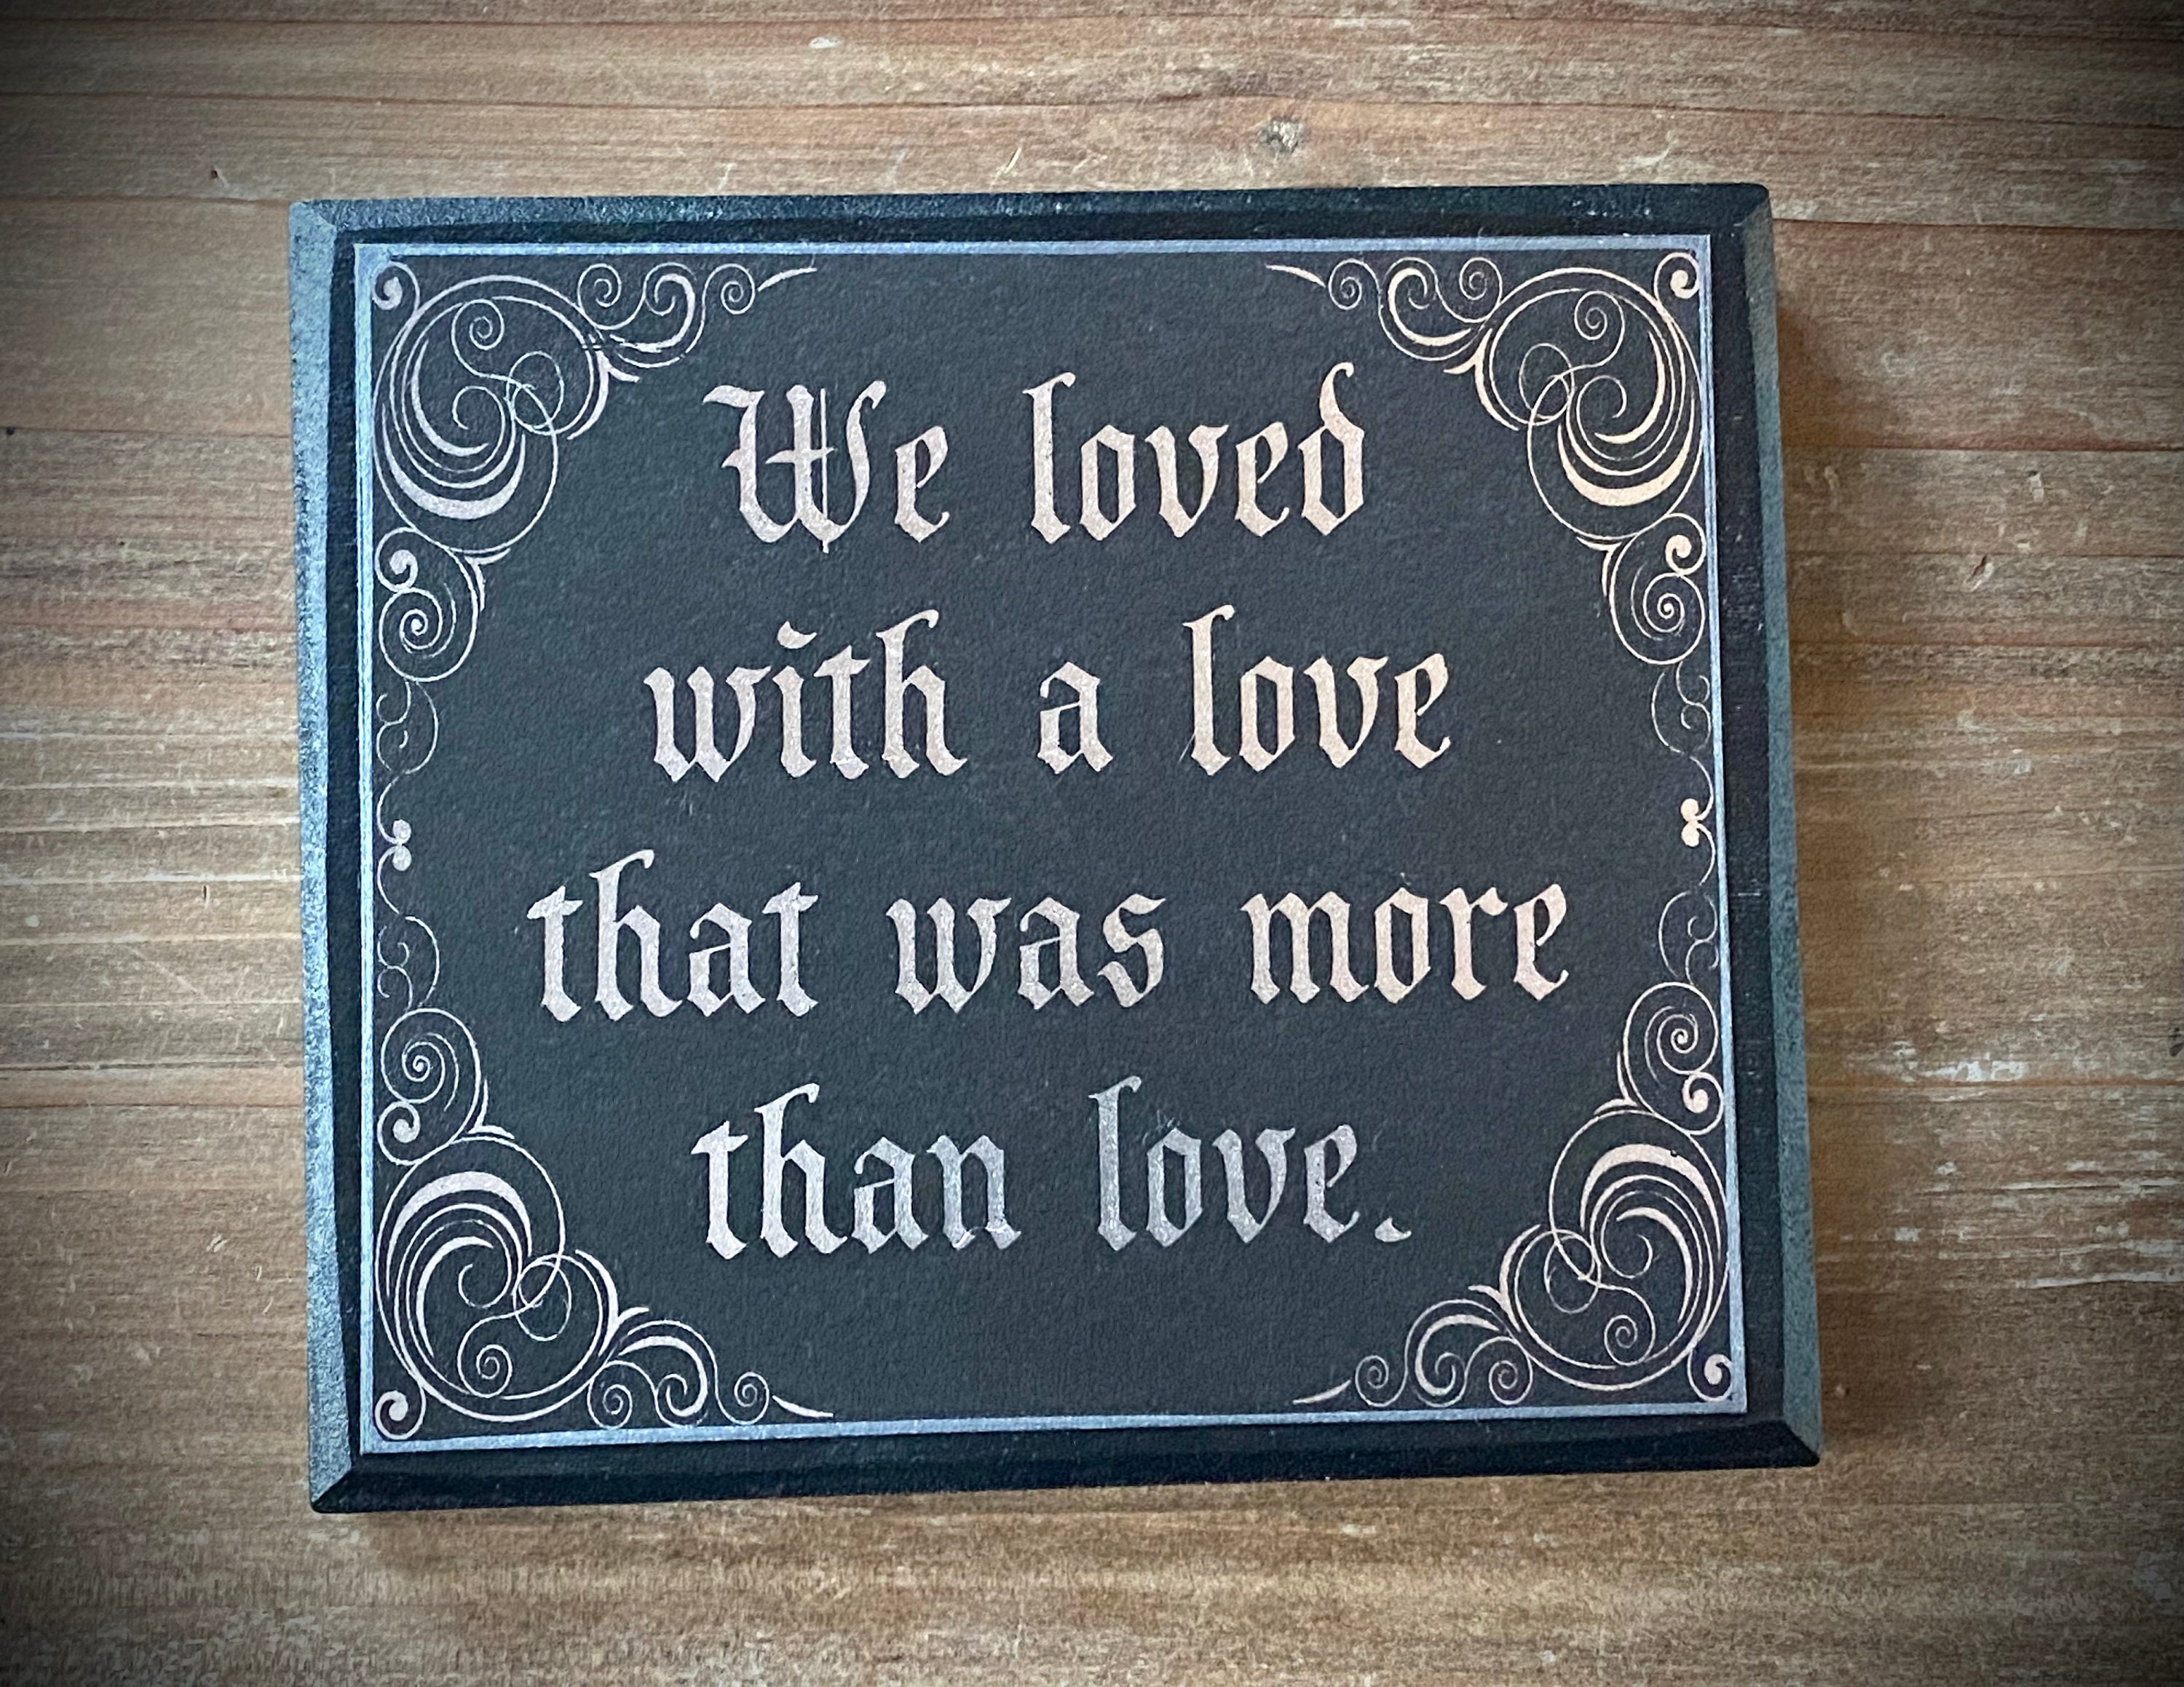  We Loved with a Love That was More Than Love. MT043